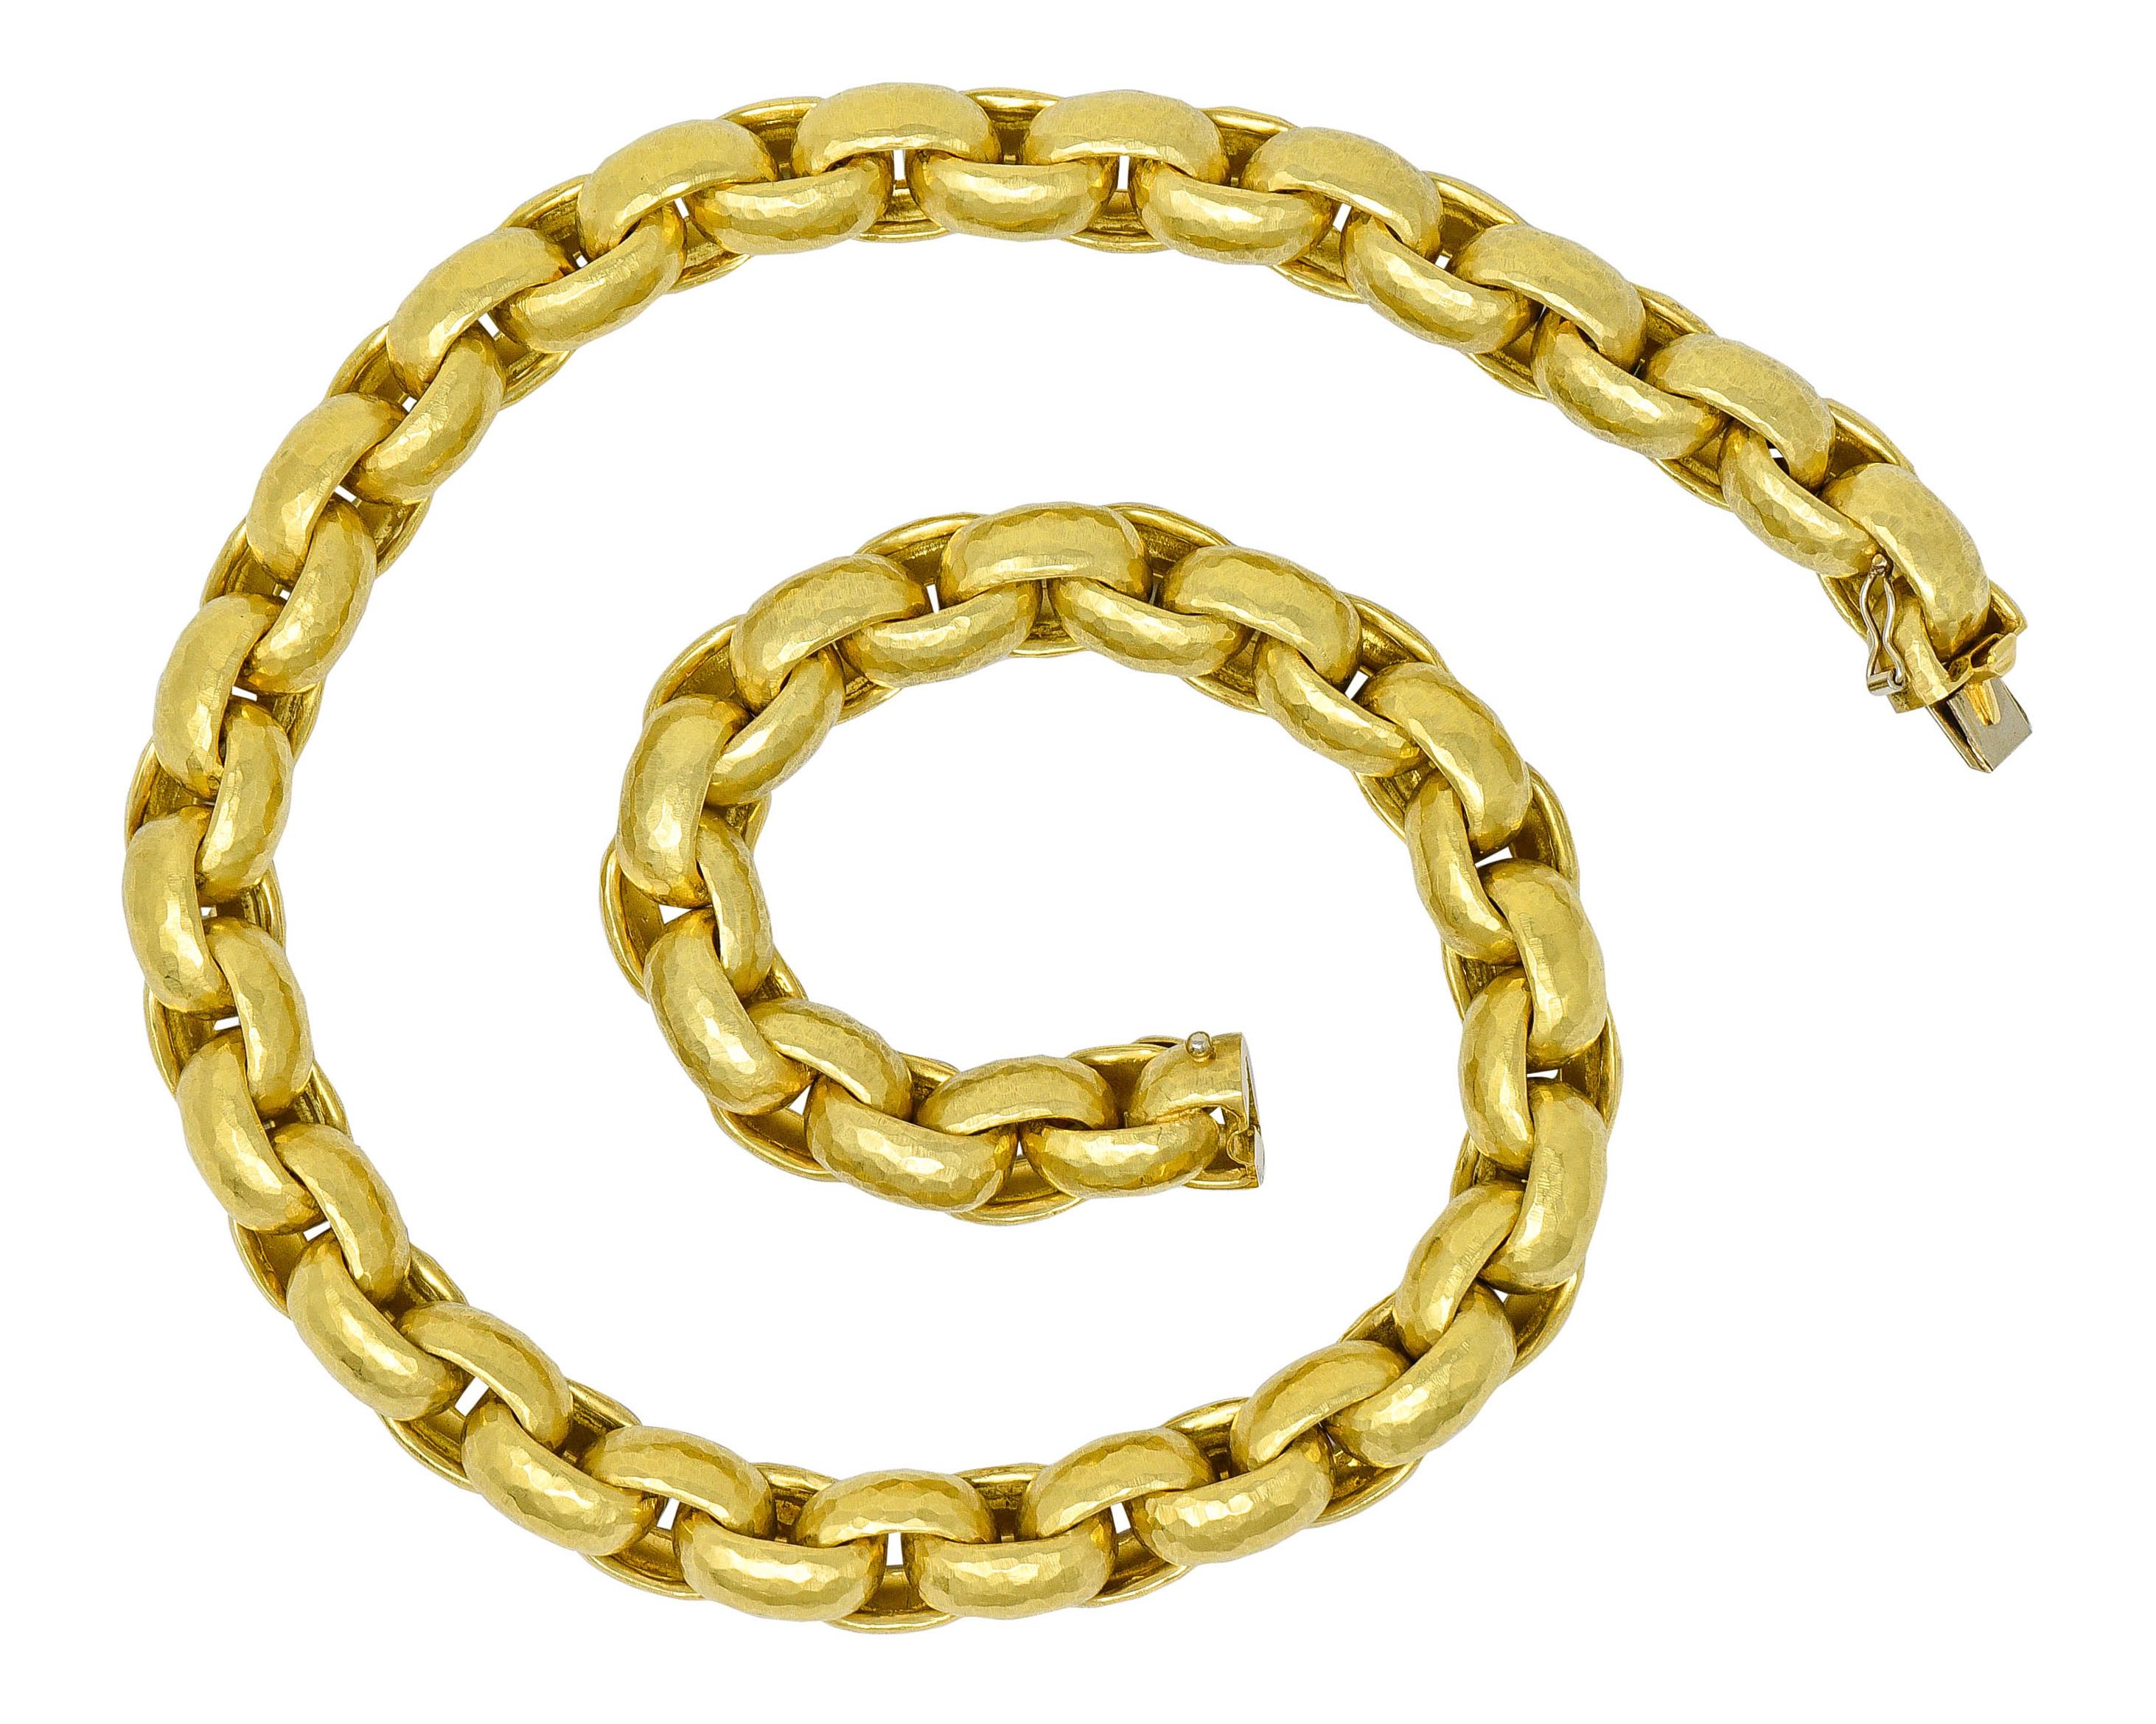 Substantial cable chain necklace featured puffed curb links

With a strongly hammered finish

Completed by a concealed clasp with figure eight safety

With Italian assay marks for 18 karat gold

Fully signed Paloma Picasso and Tiffany & Co.

Circa: